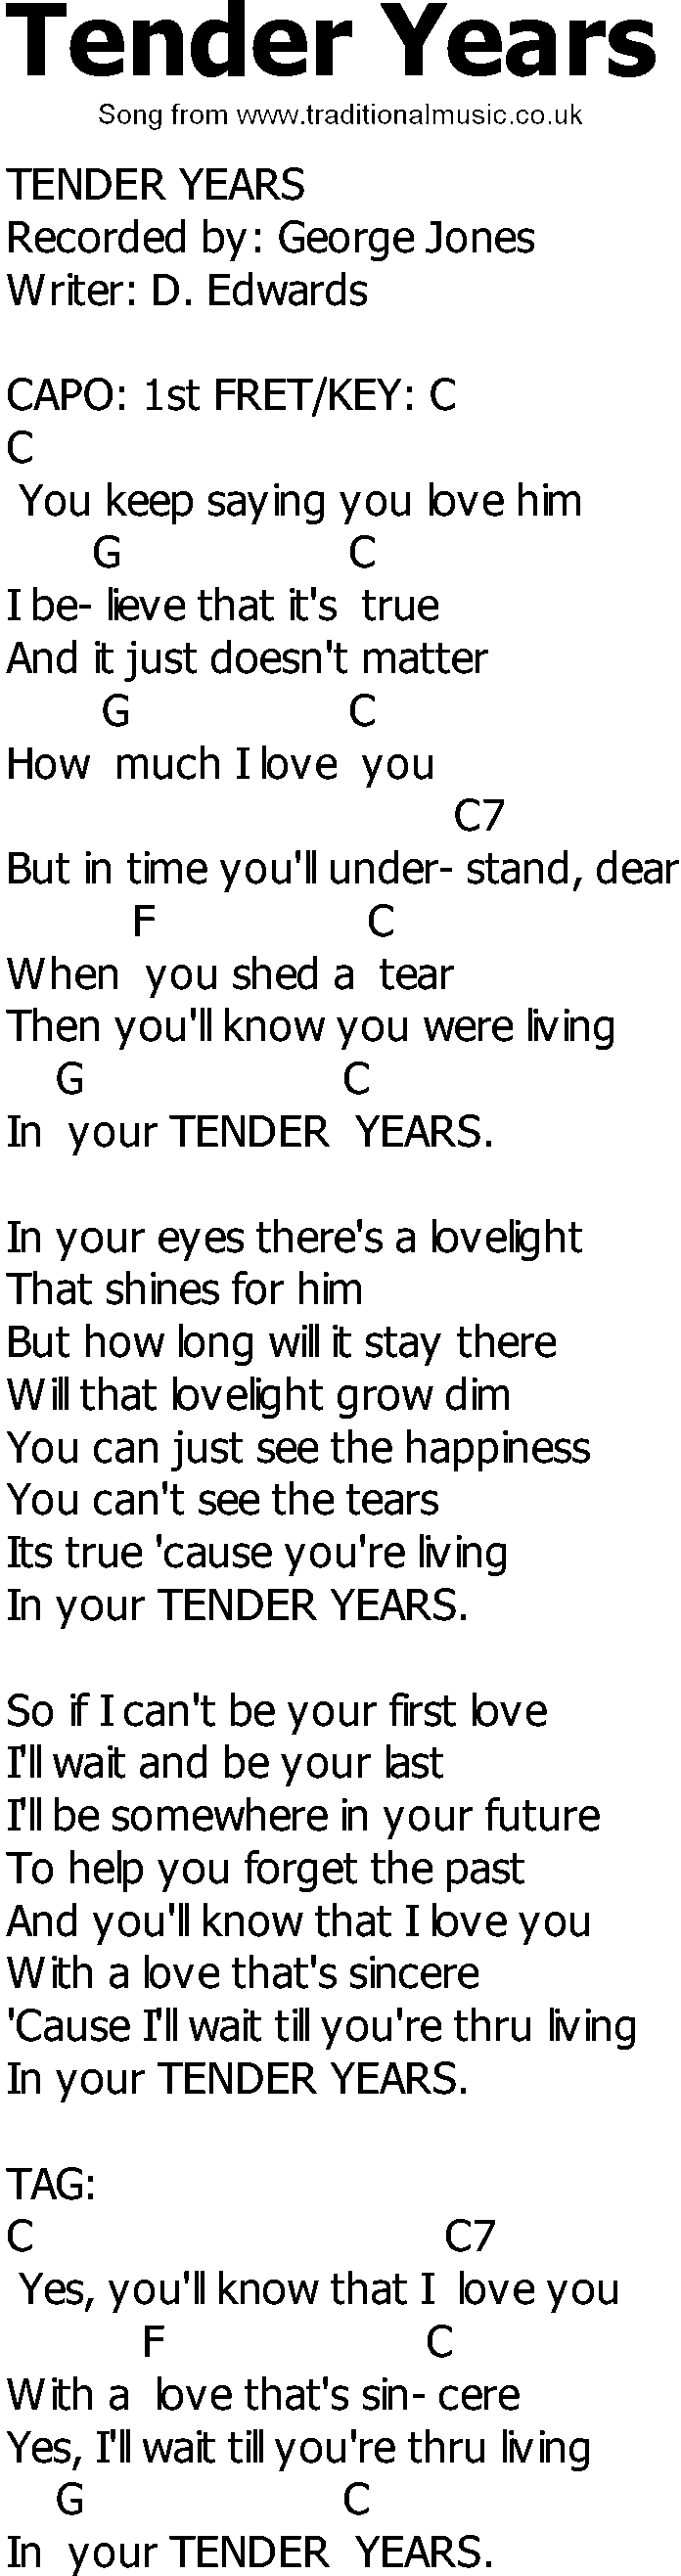 Old Country song lyrics with chords - Tender Years